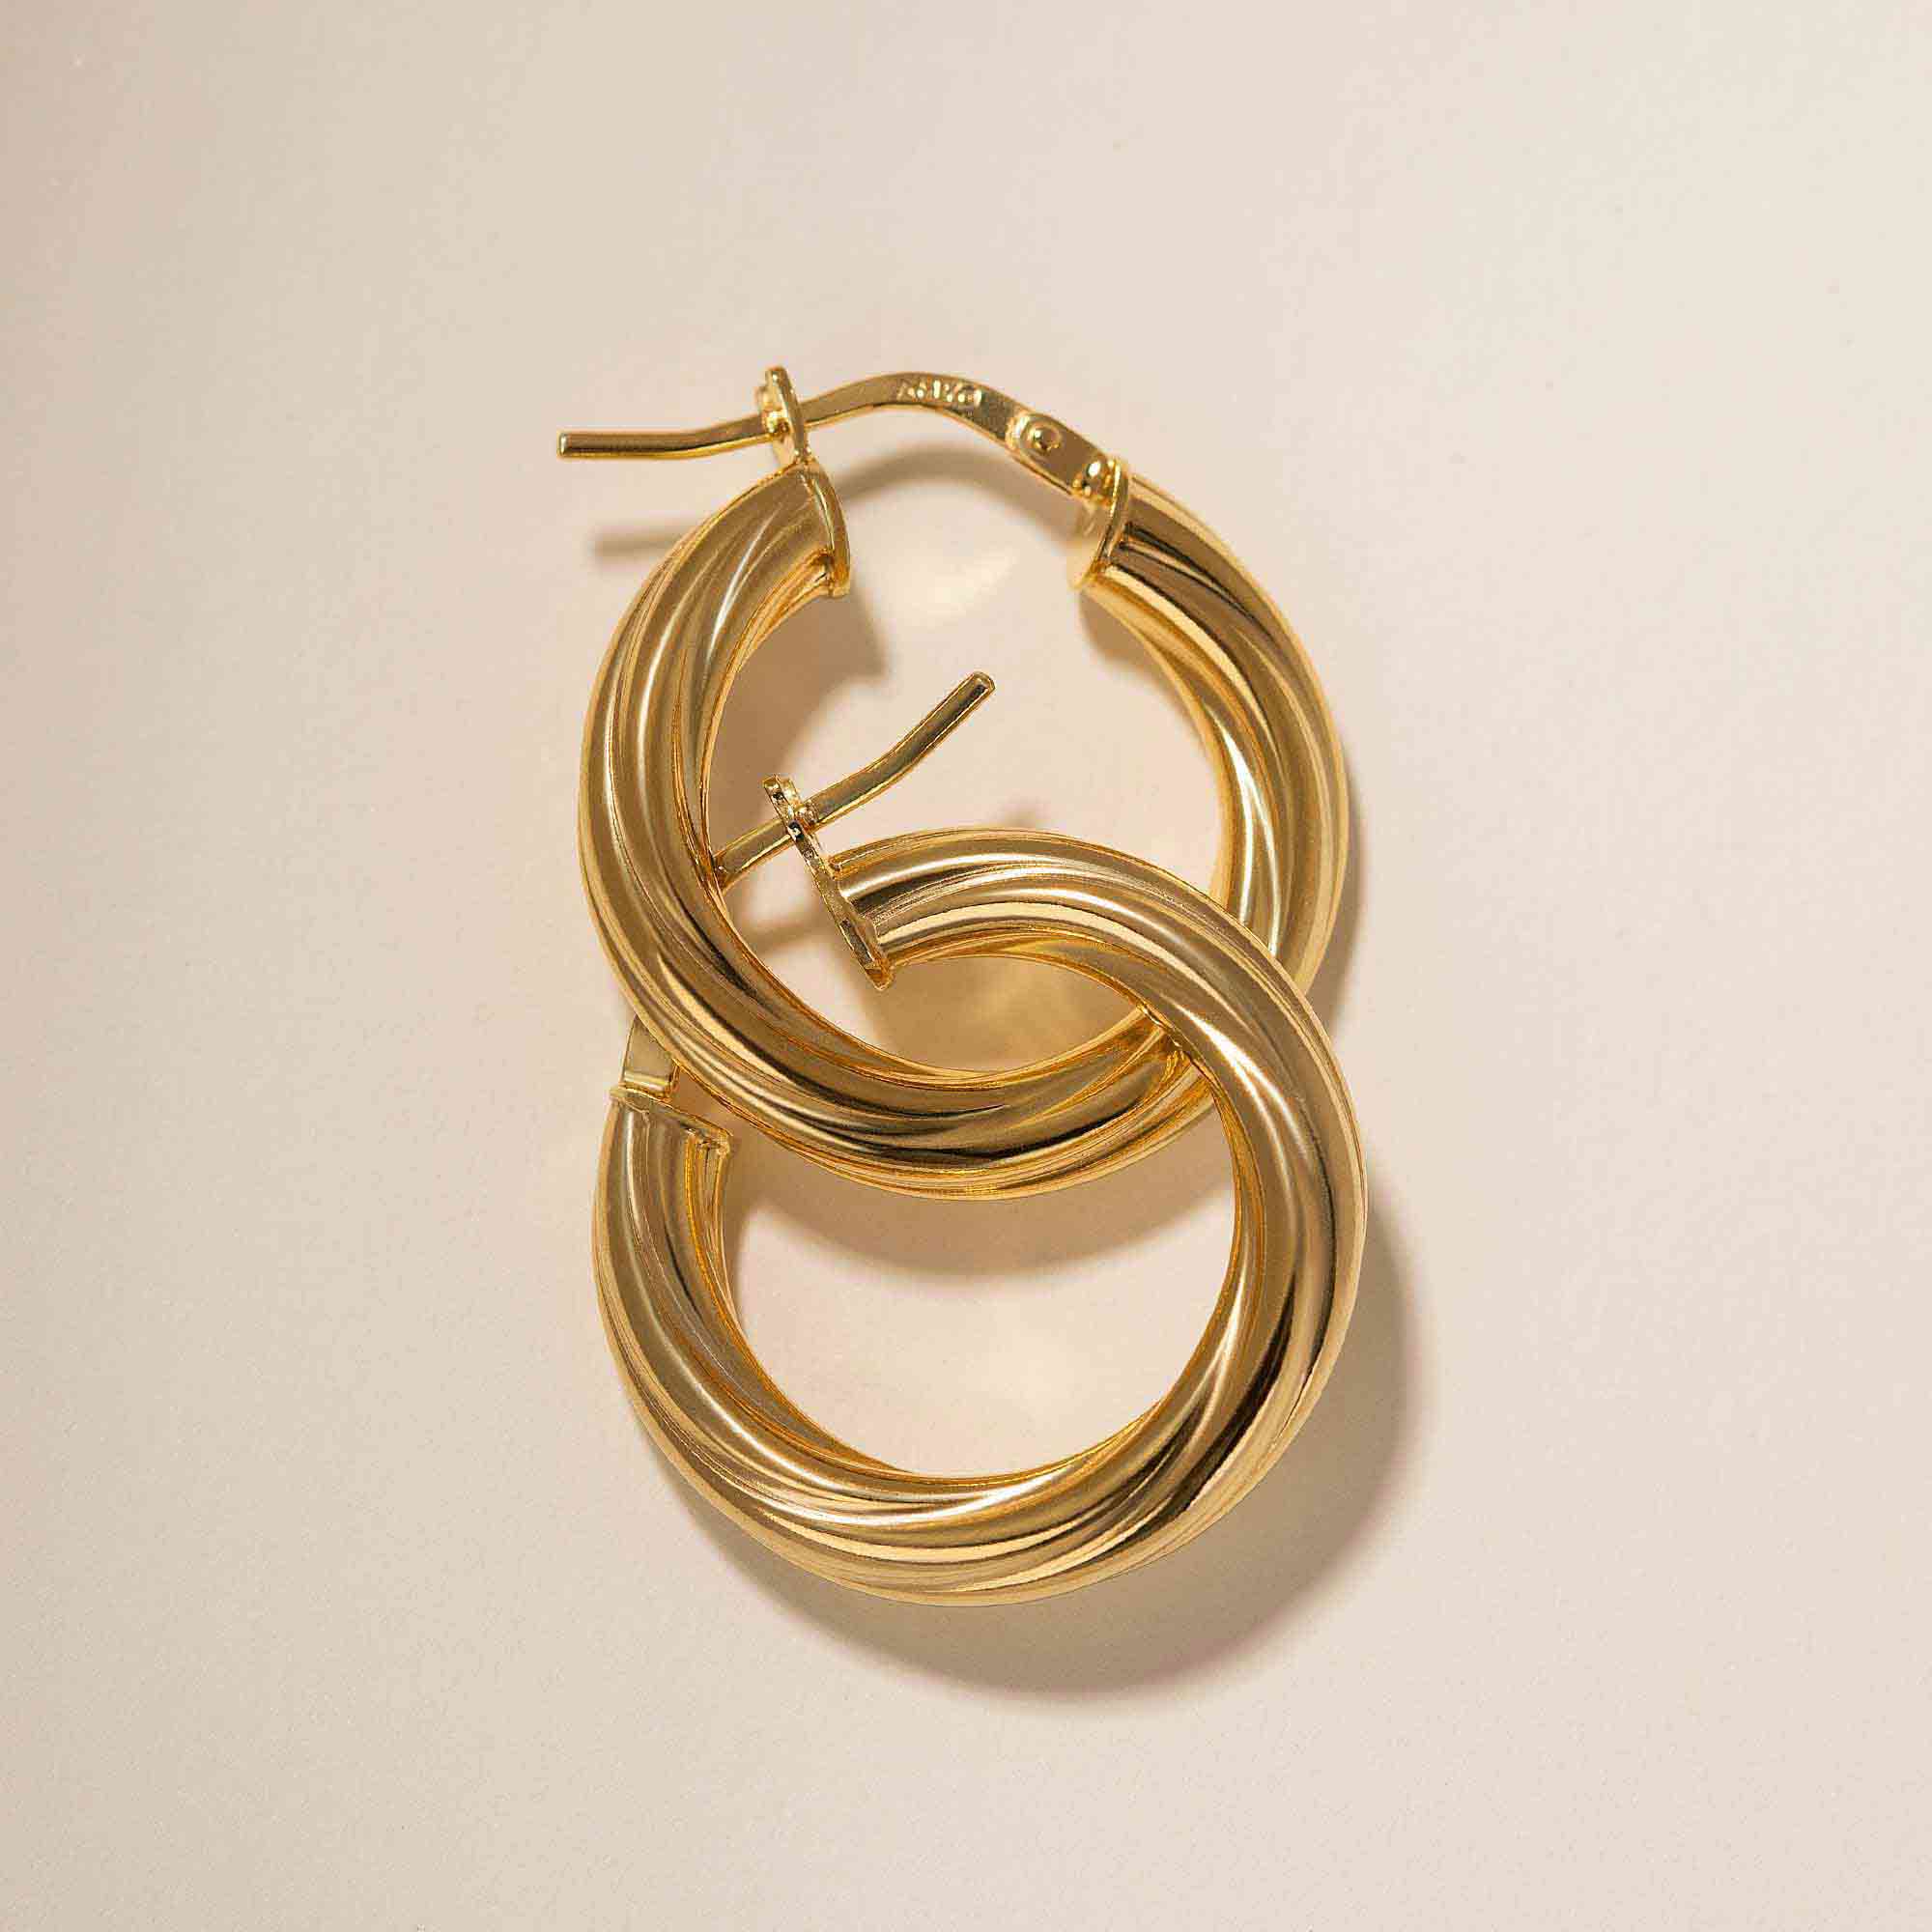 Thick Twisted Hoops